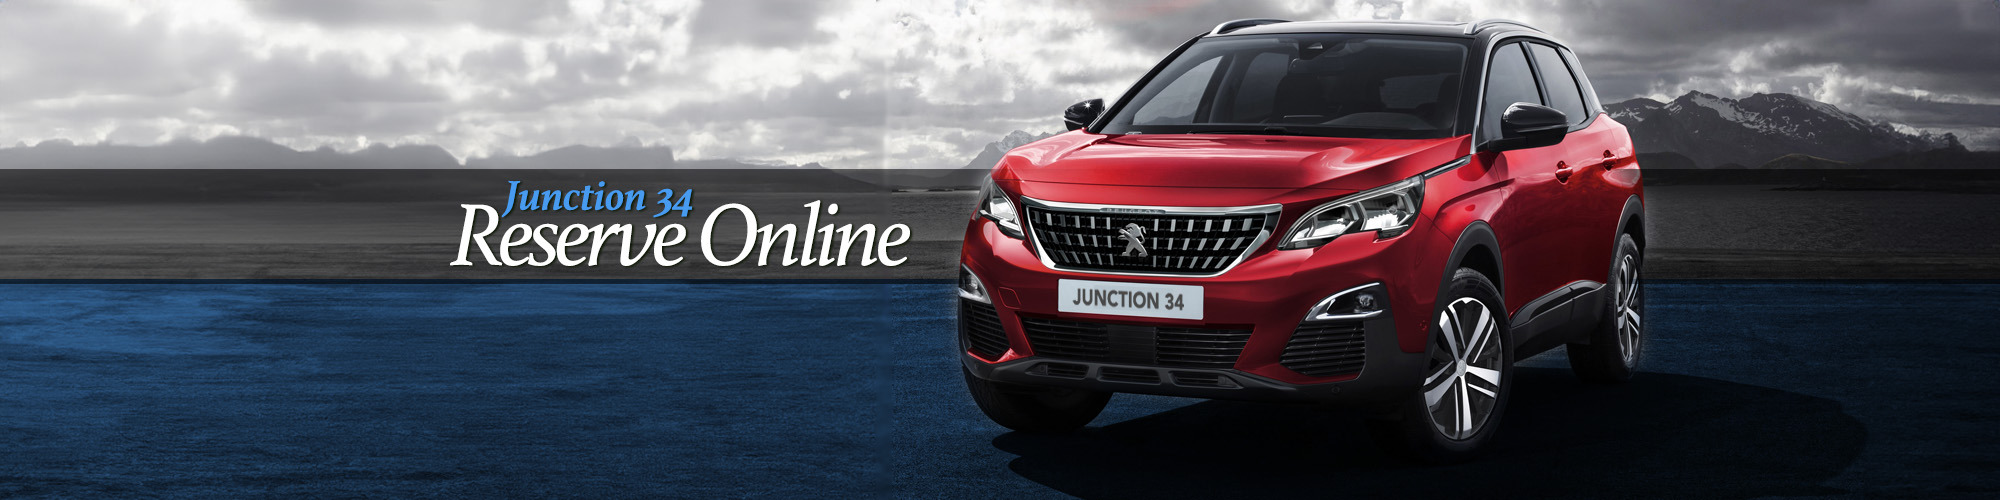 Reserve Online with Junction 34 Car Sales